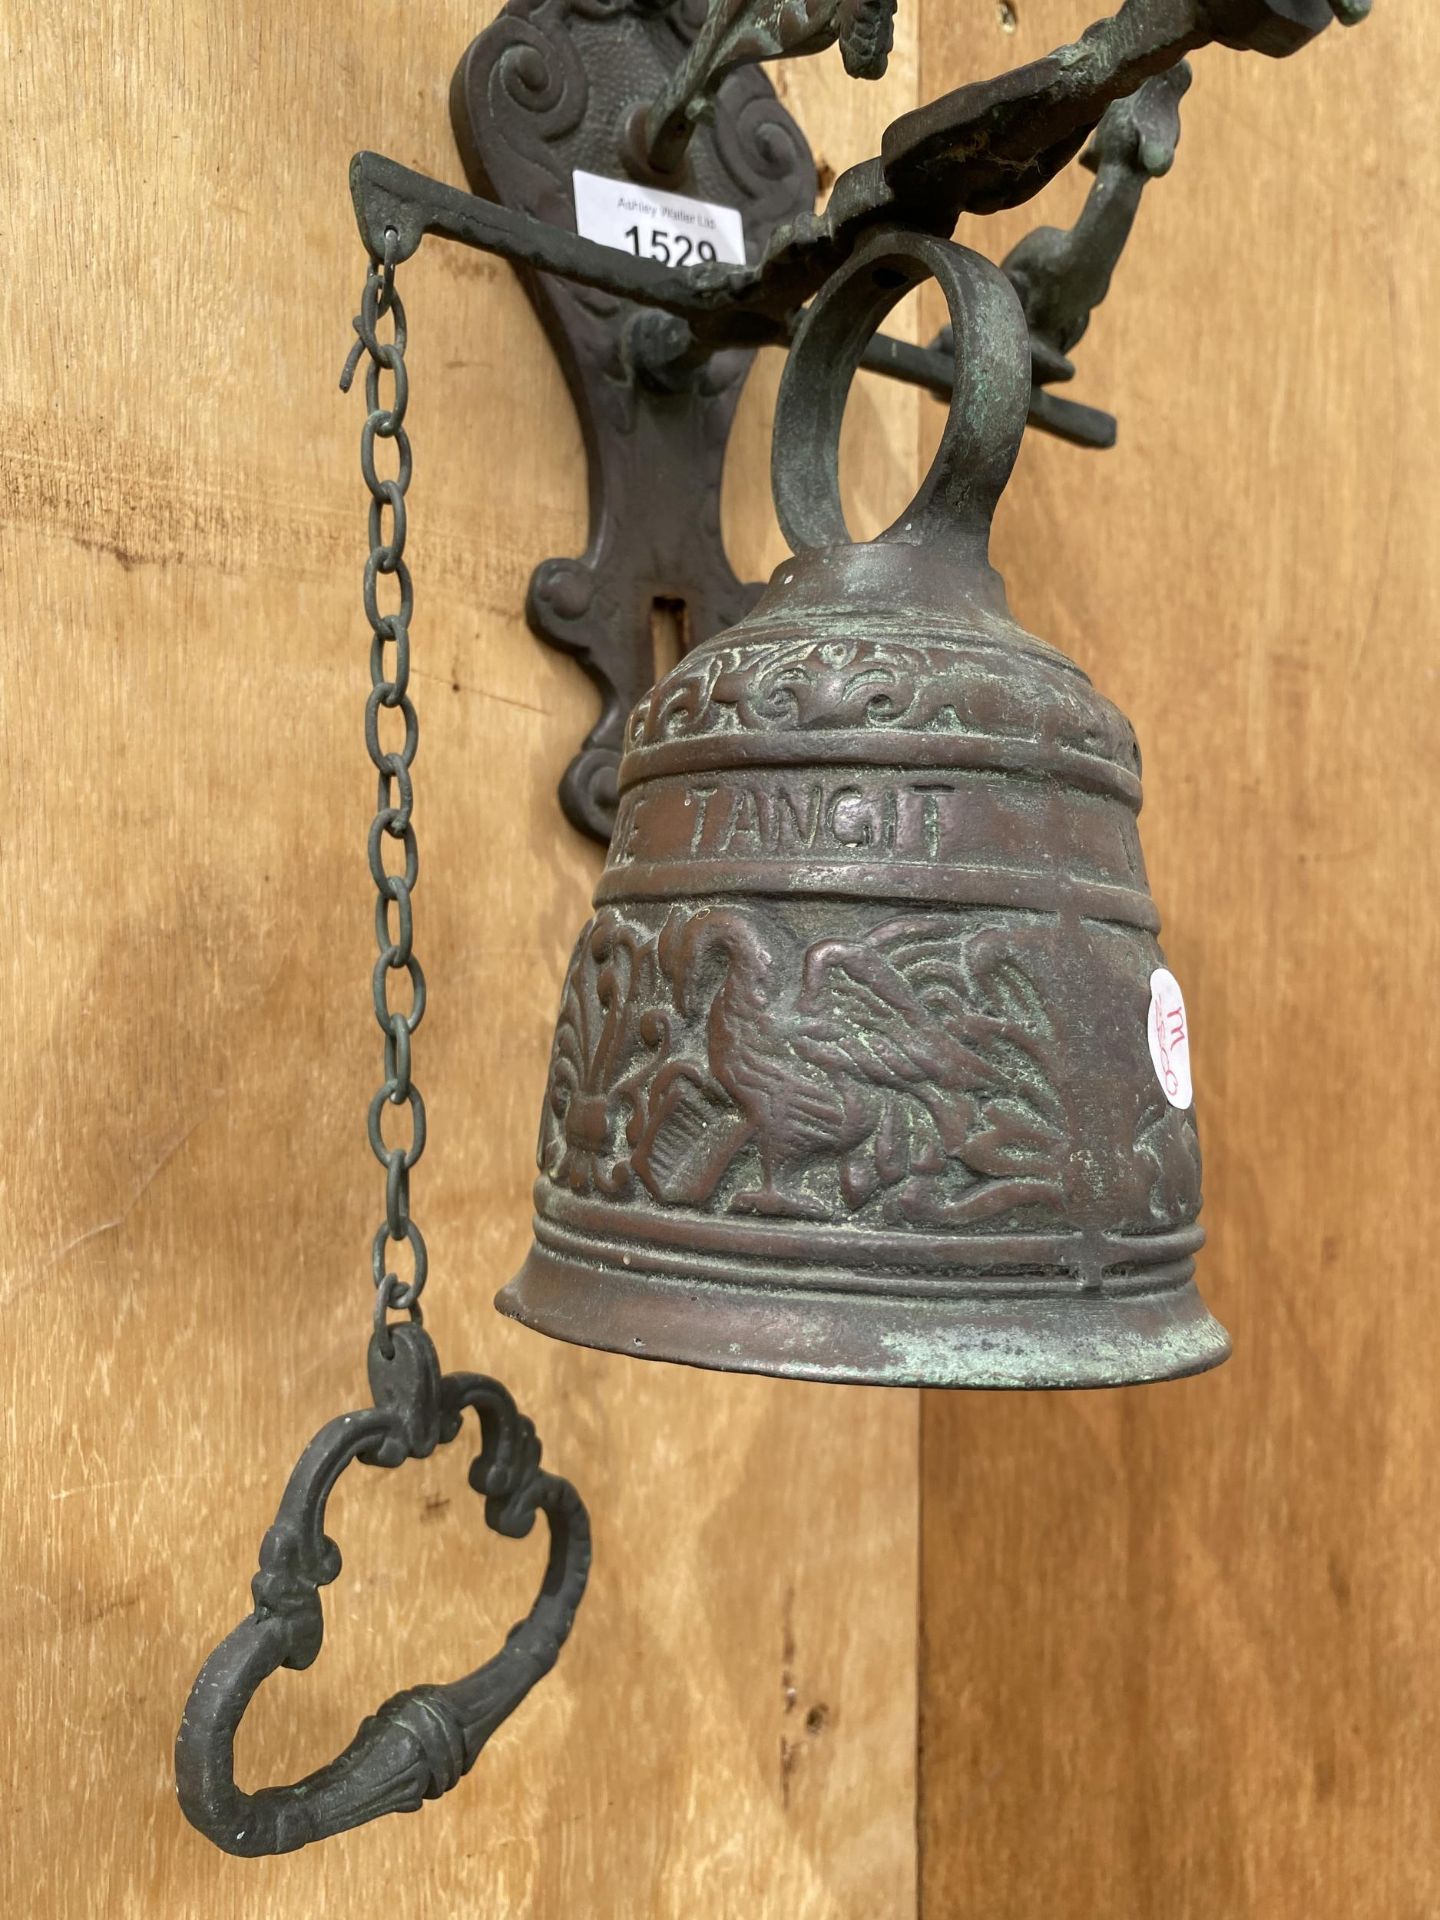 A VINTAGE BRASS WALL HANGING BELL - Image 2 of 3